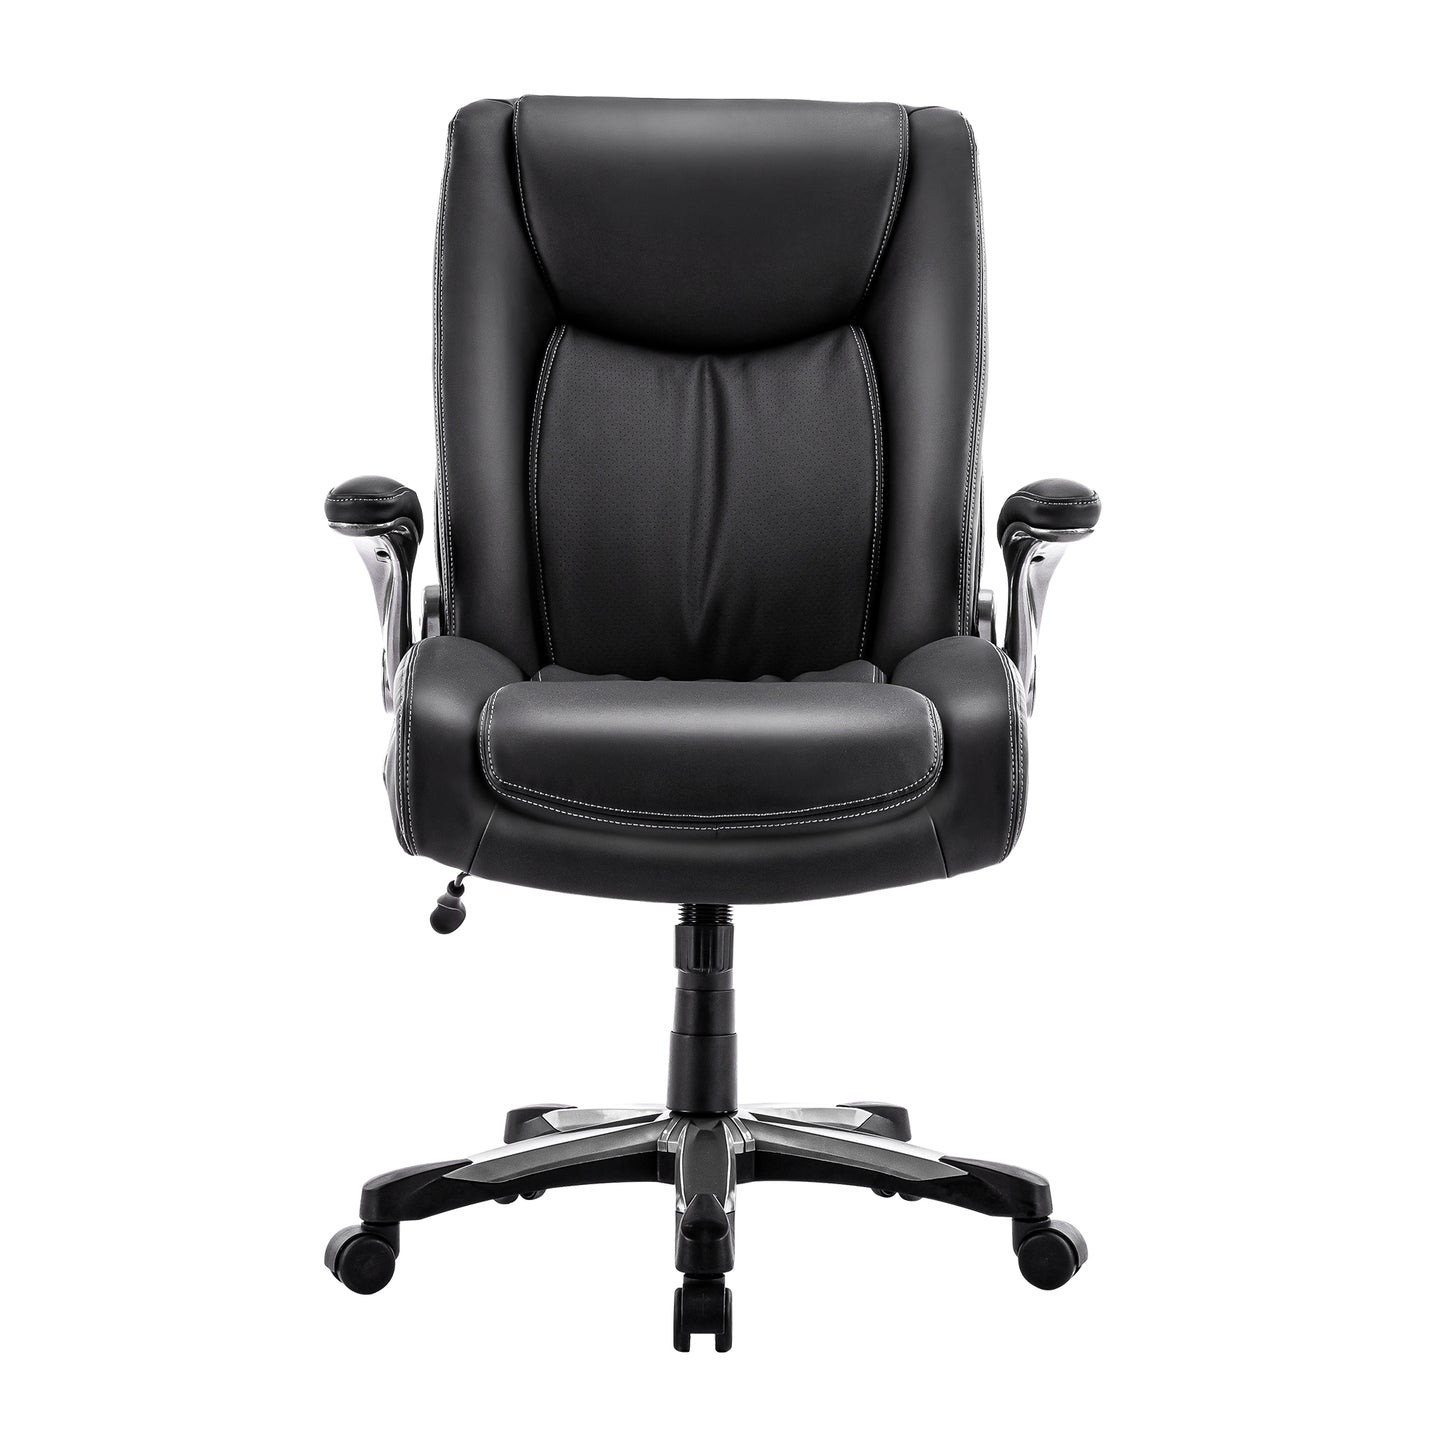 COLAMY PU Leather Big & Tall Office Chair 400lbs Computer Chair Model.5309